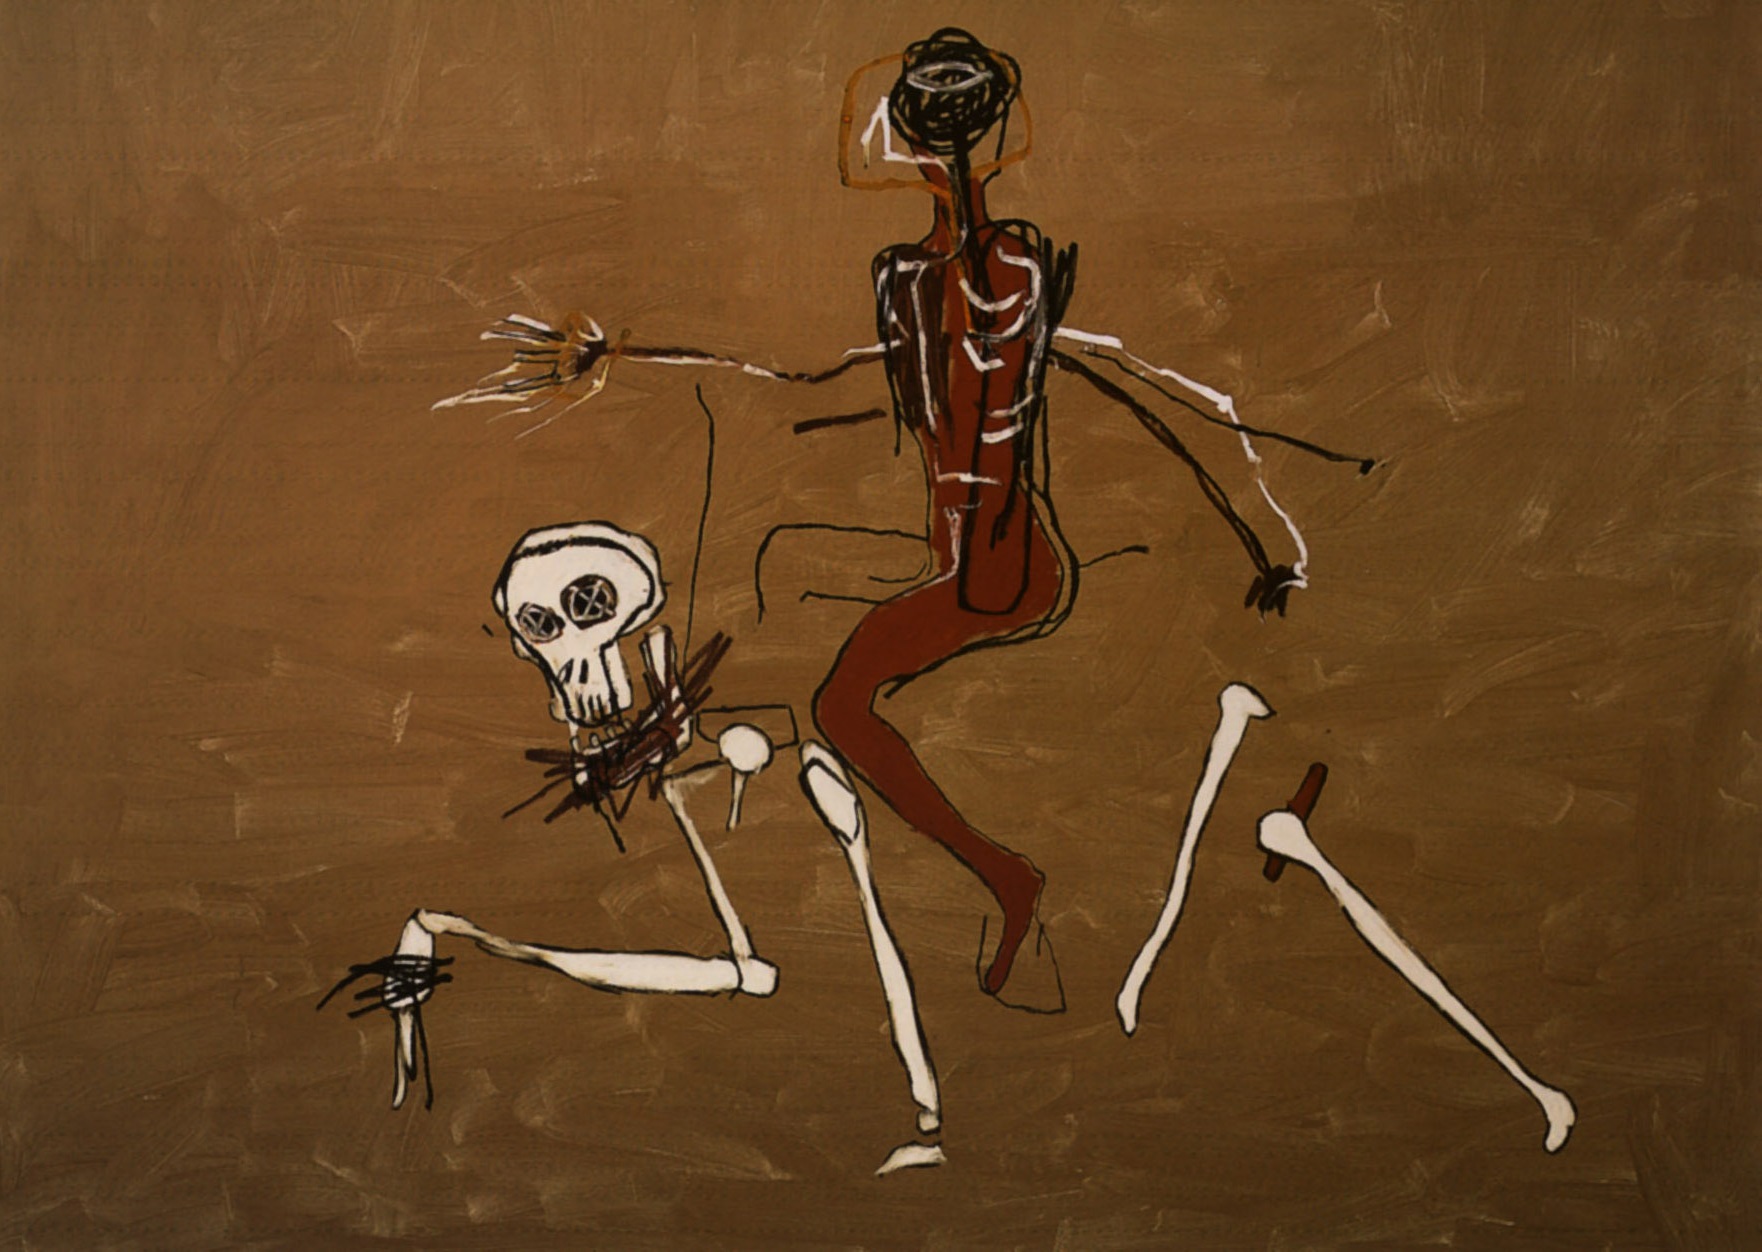 Riding with Death (1988): One of Jean-Michel Basquiat’s Last Paintings